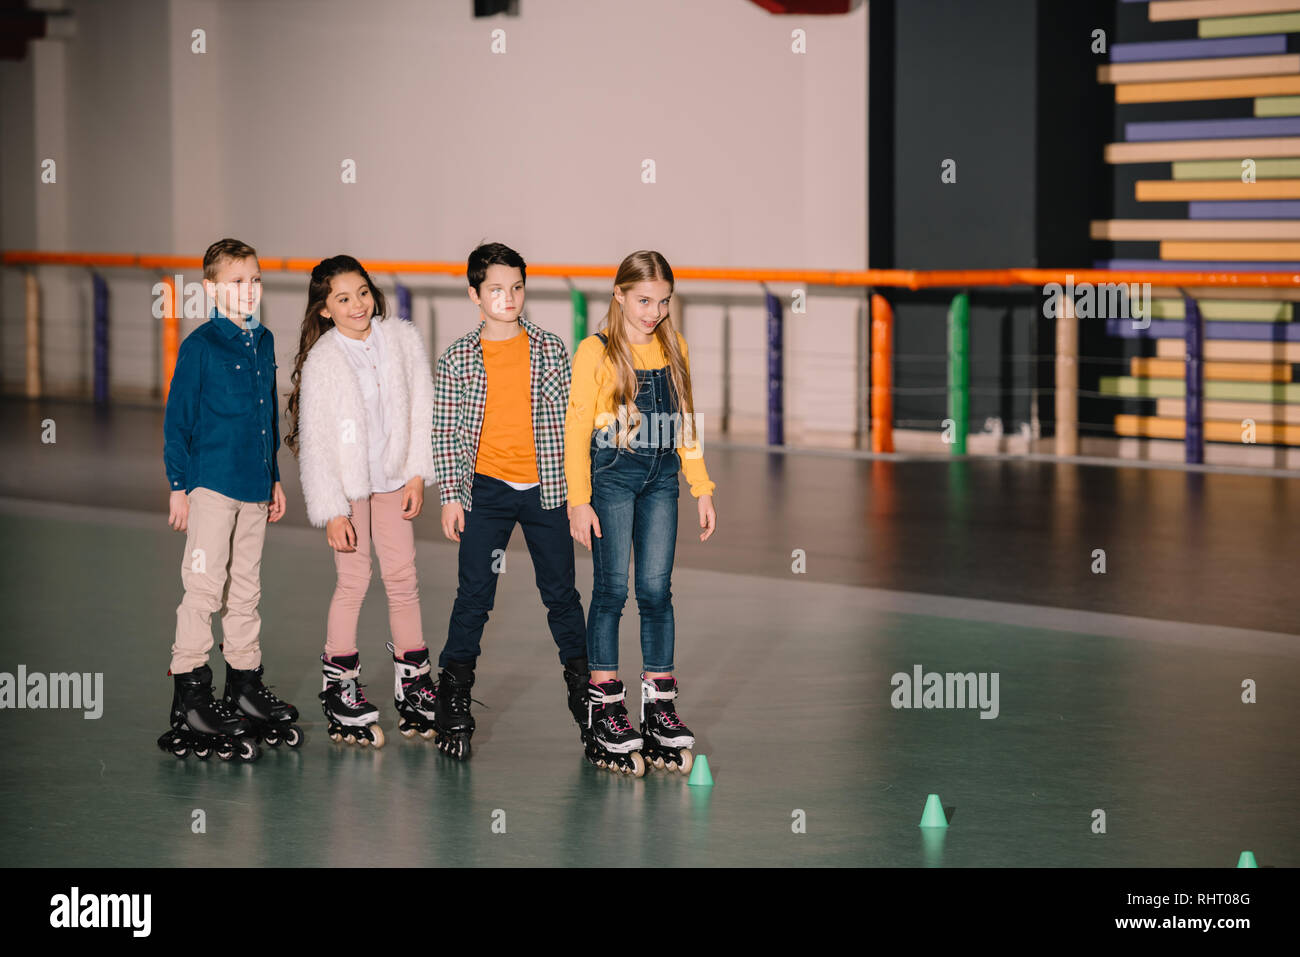 Smiling cute kids ride roller skaters together Stock Photo